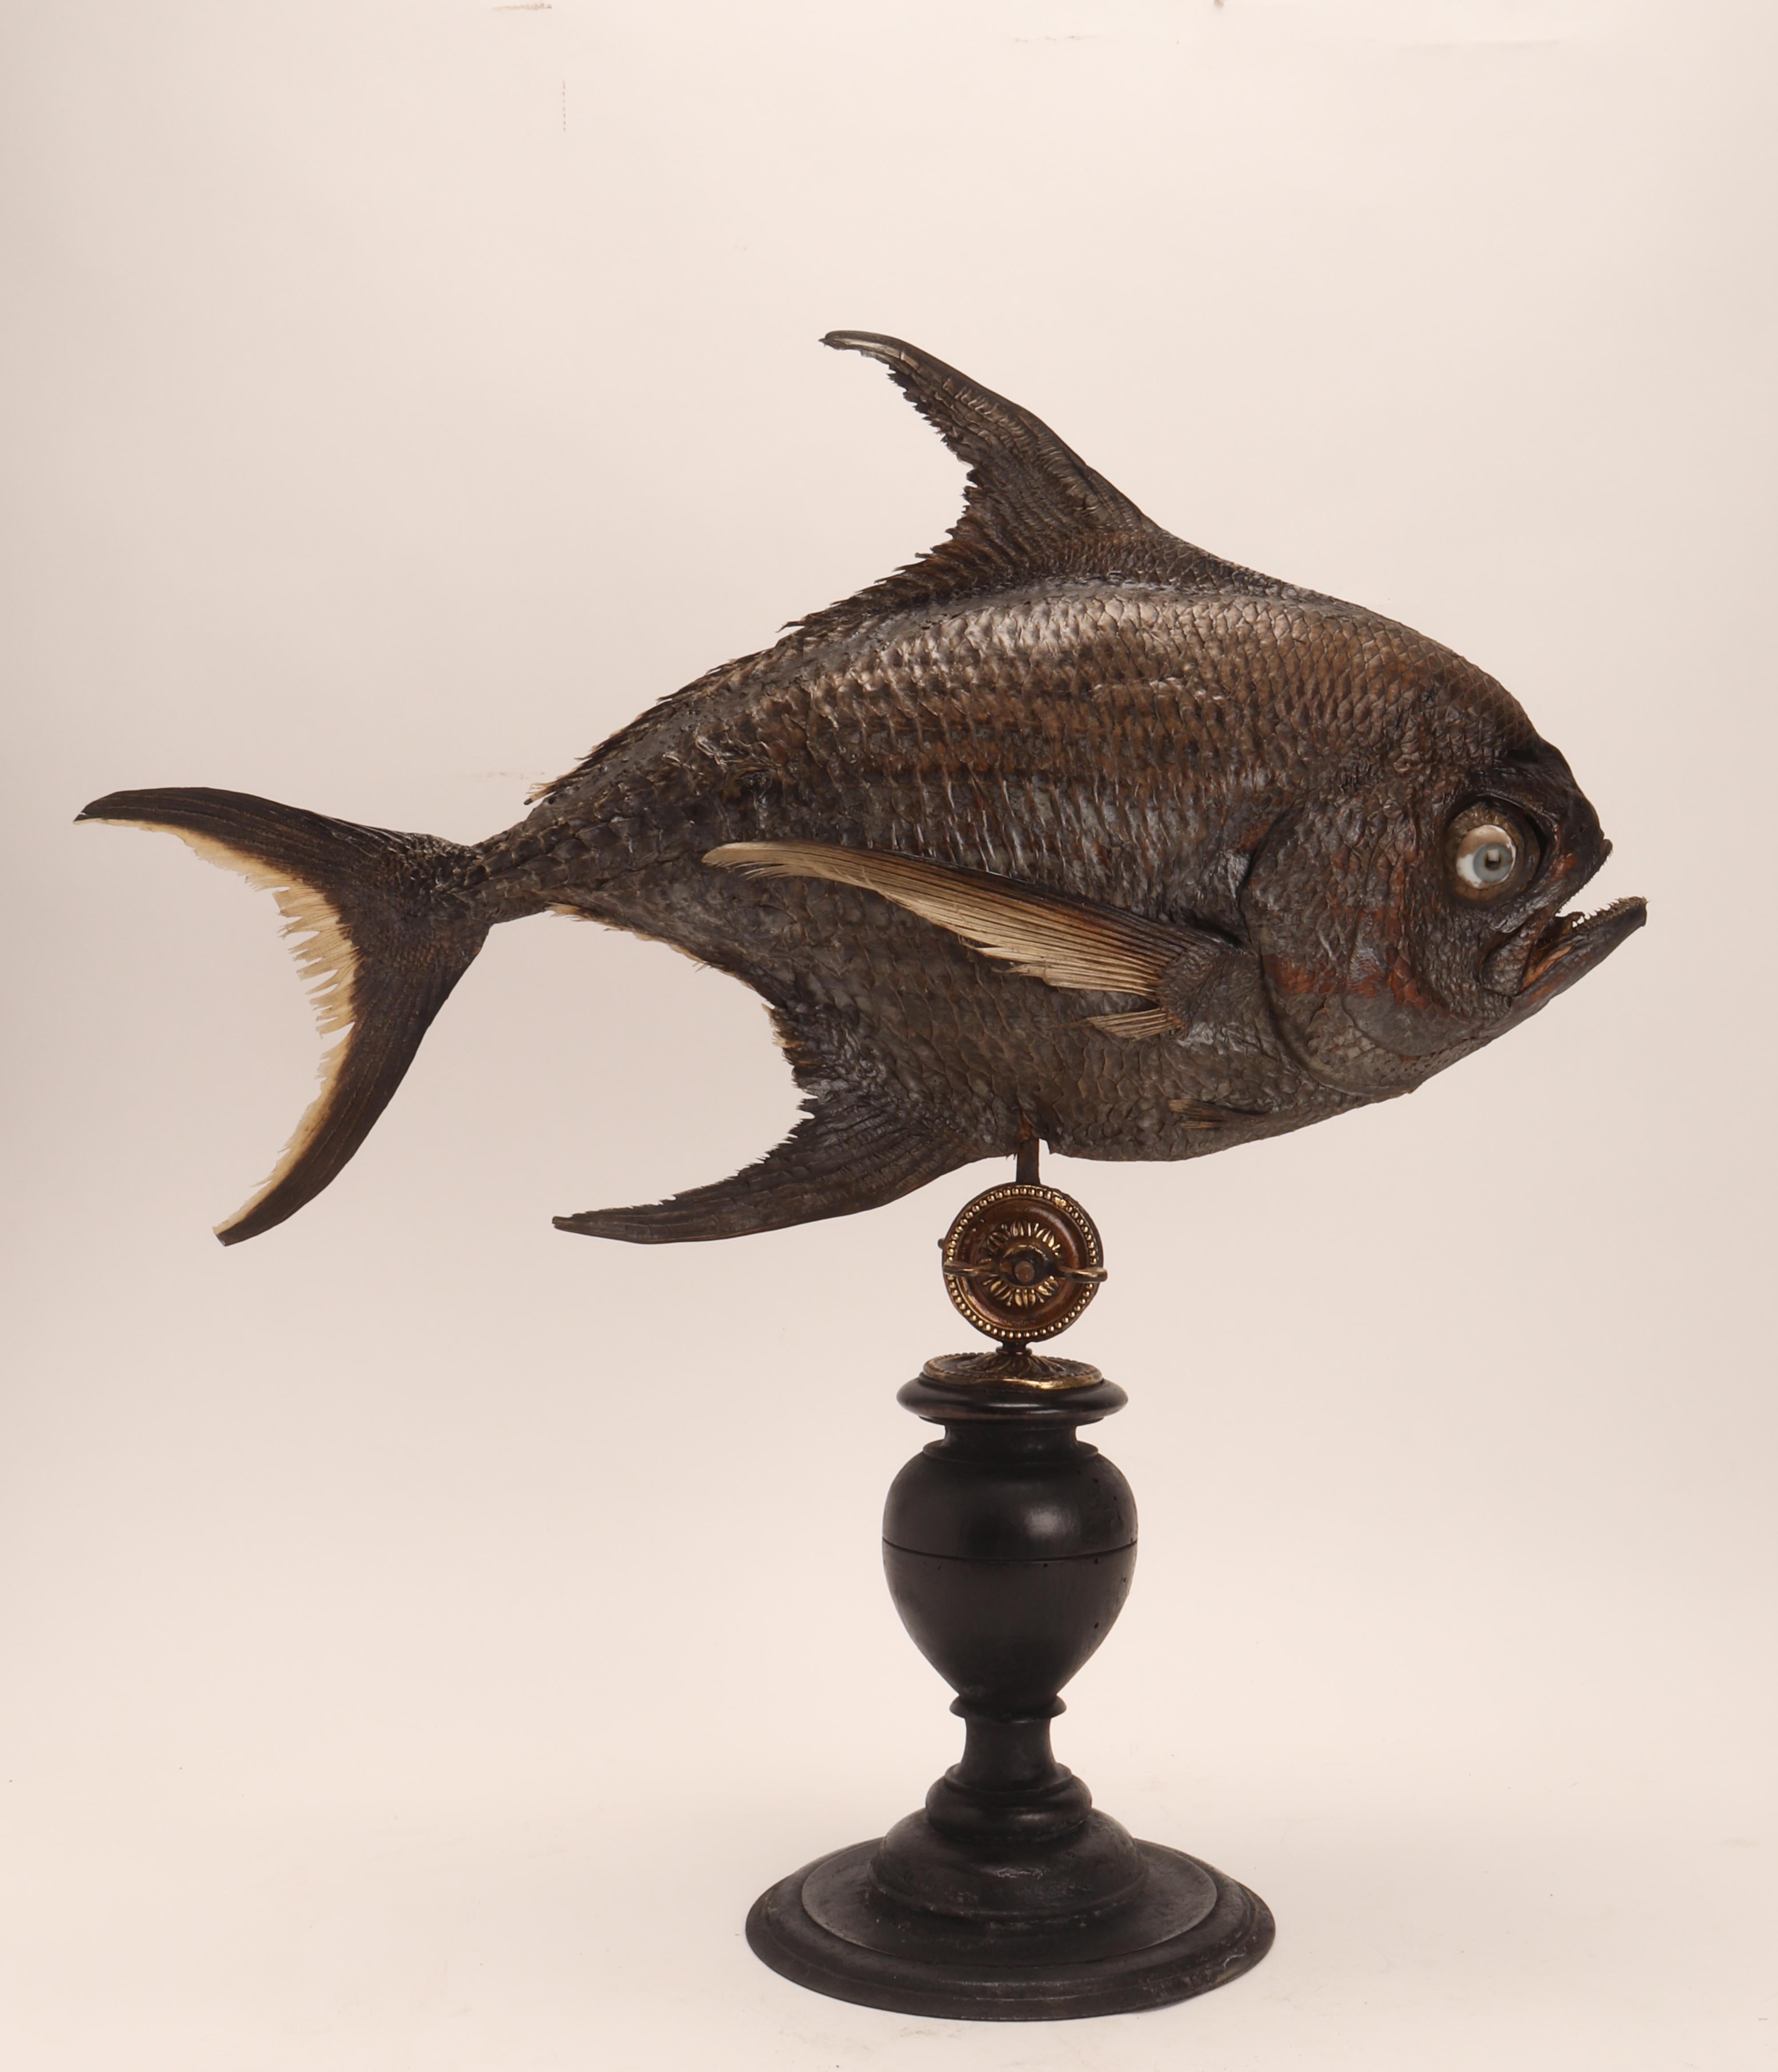 Taxidermy marine natural Wunderkammer specimen, embalmed sickle pomfret (Familia: Bramidae. Genus: Taractichthys. Species: Steindachneri). The Specimen is stuffed and mounted over a base that rotates 360 degrees on its own axis and tilts and locked